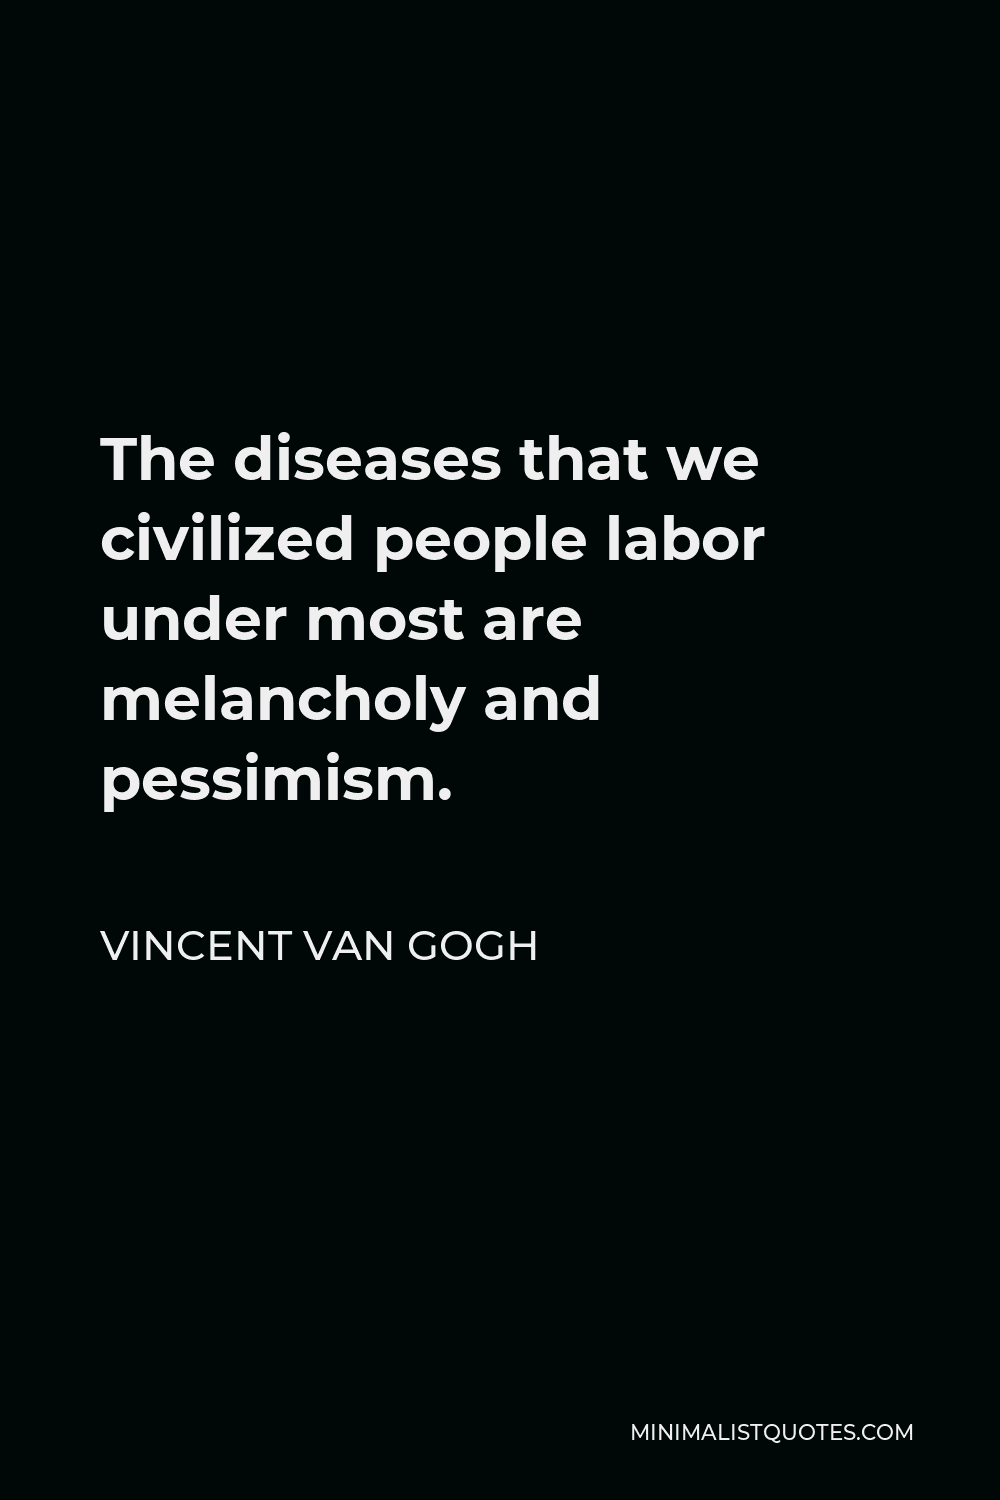 Vincent Van Gogh Quote - The diseases that we civilized people labor under most are melancholy and pessimism.